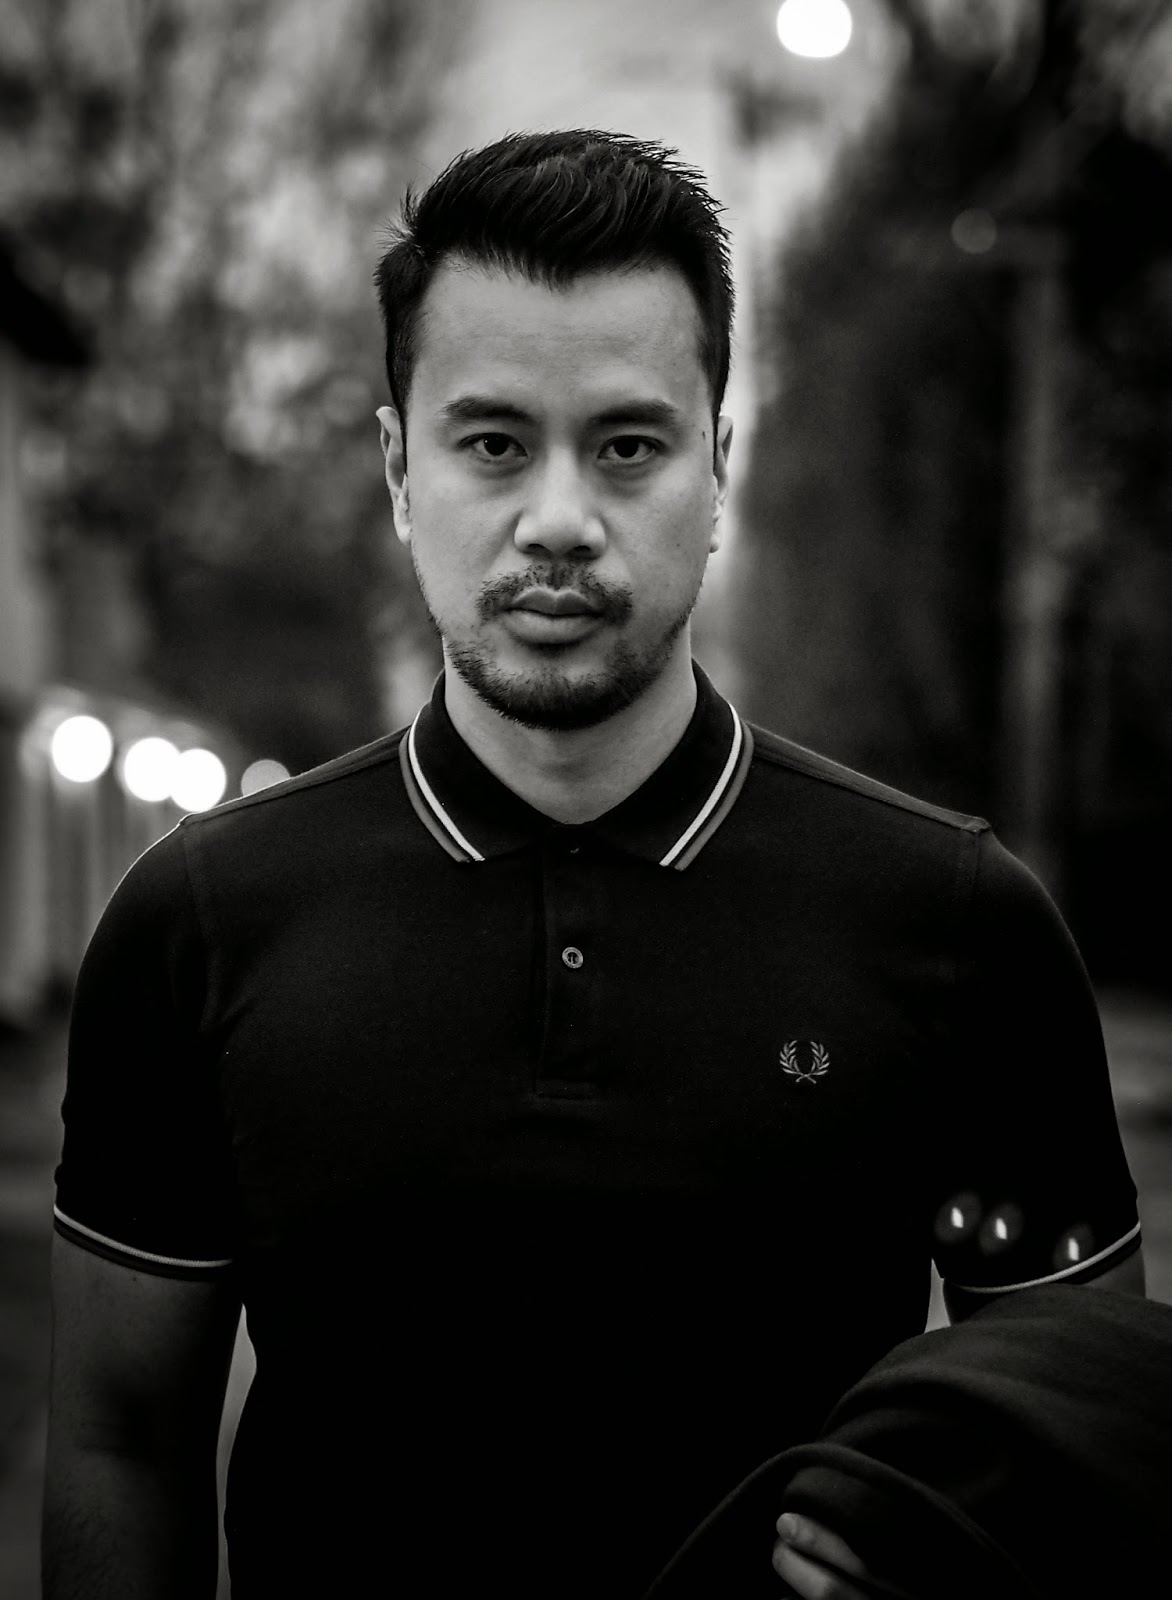 fred perry polo